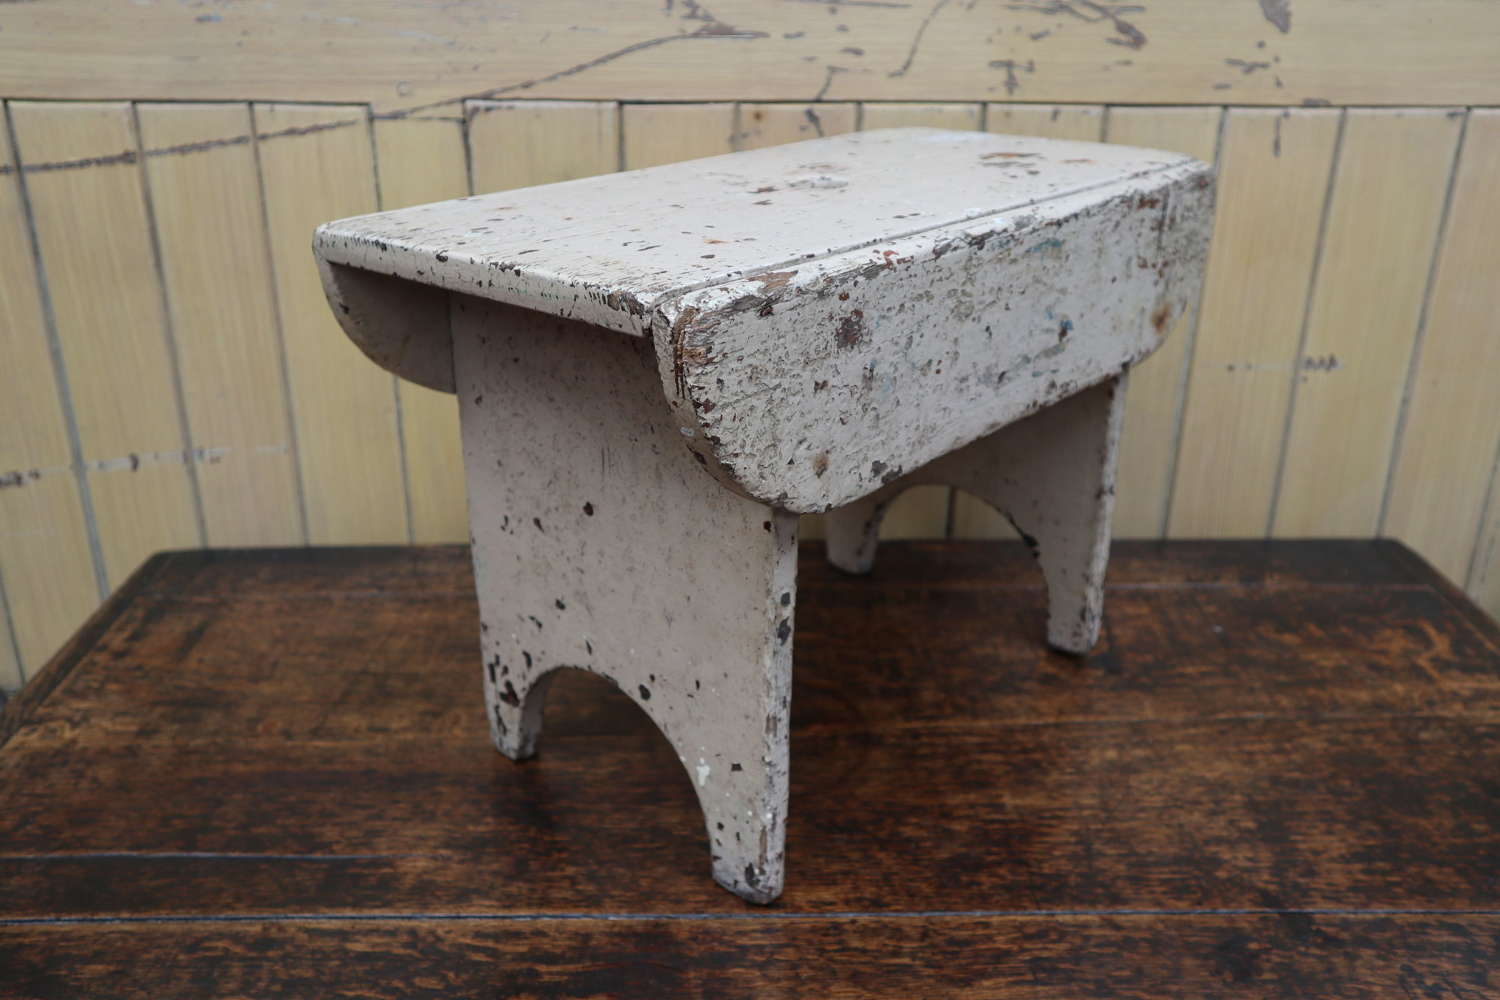 19th Century Scottish vernacular painted creepie or boarded stool